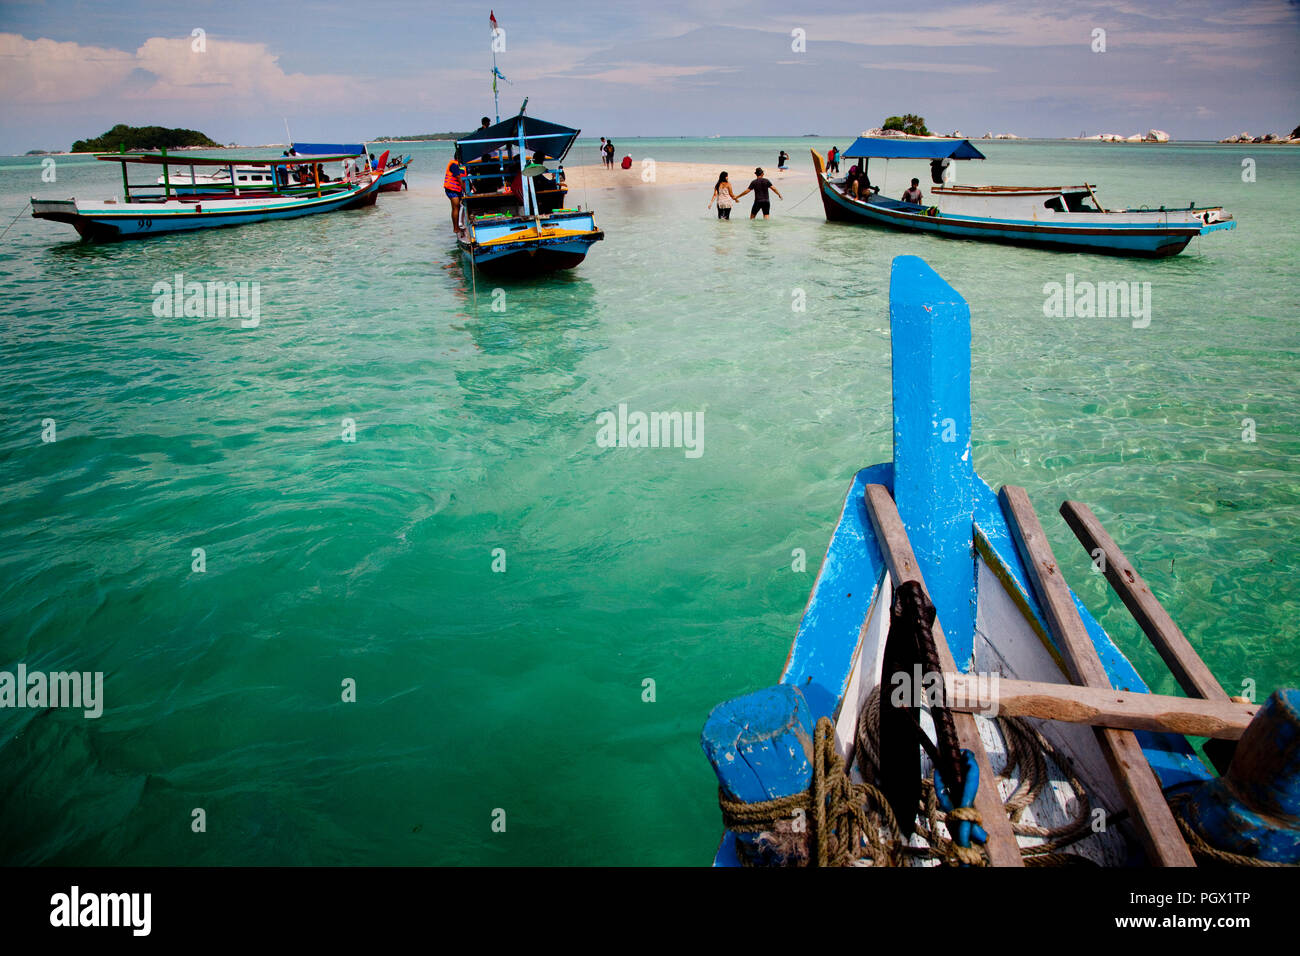 A couple visits a picturesque sand island off the coast of Belitung, Indonesia. Stock Photo